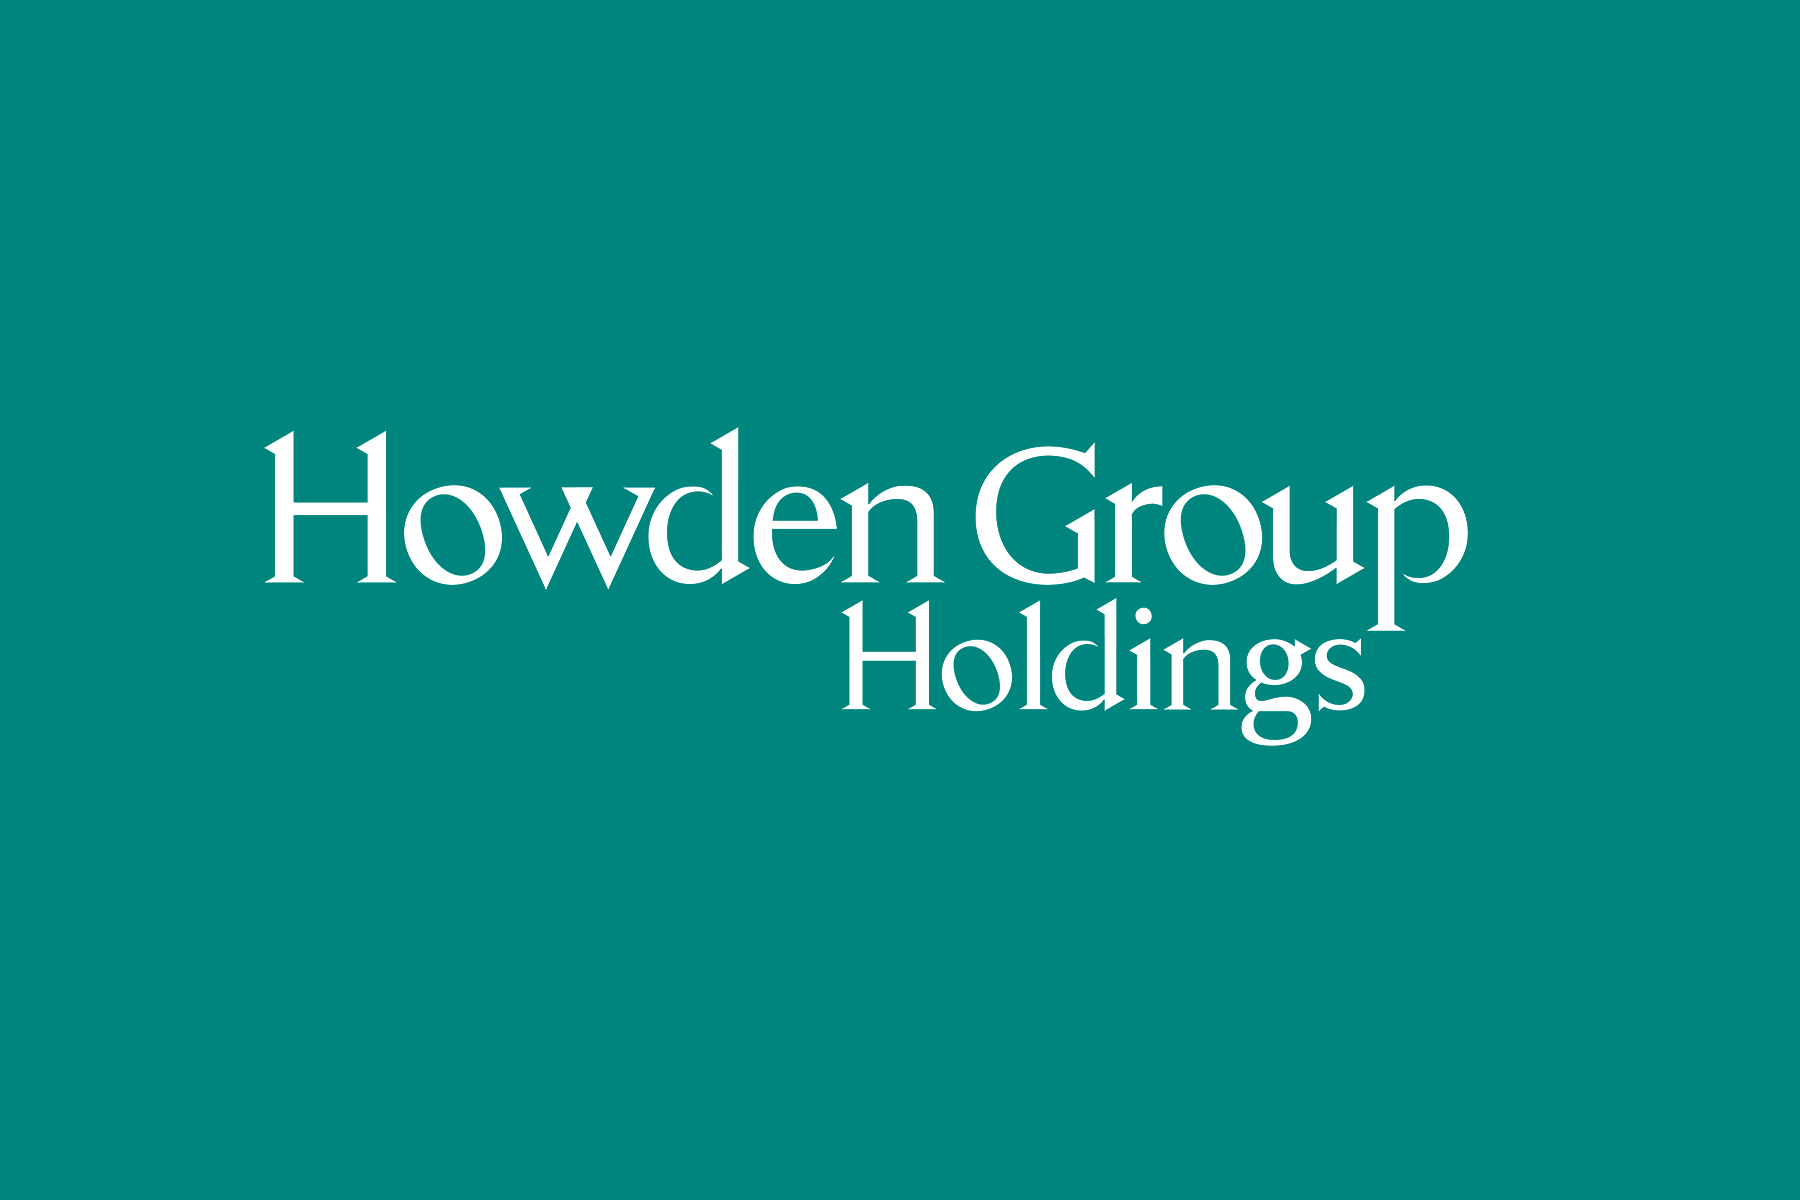 Howden Group Holdings Logo on green background